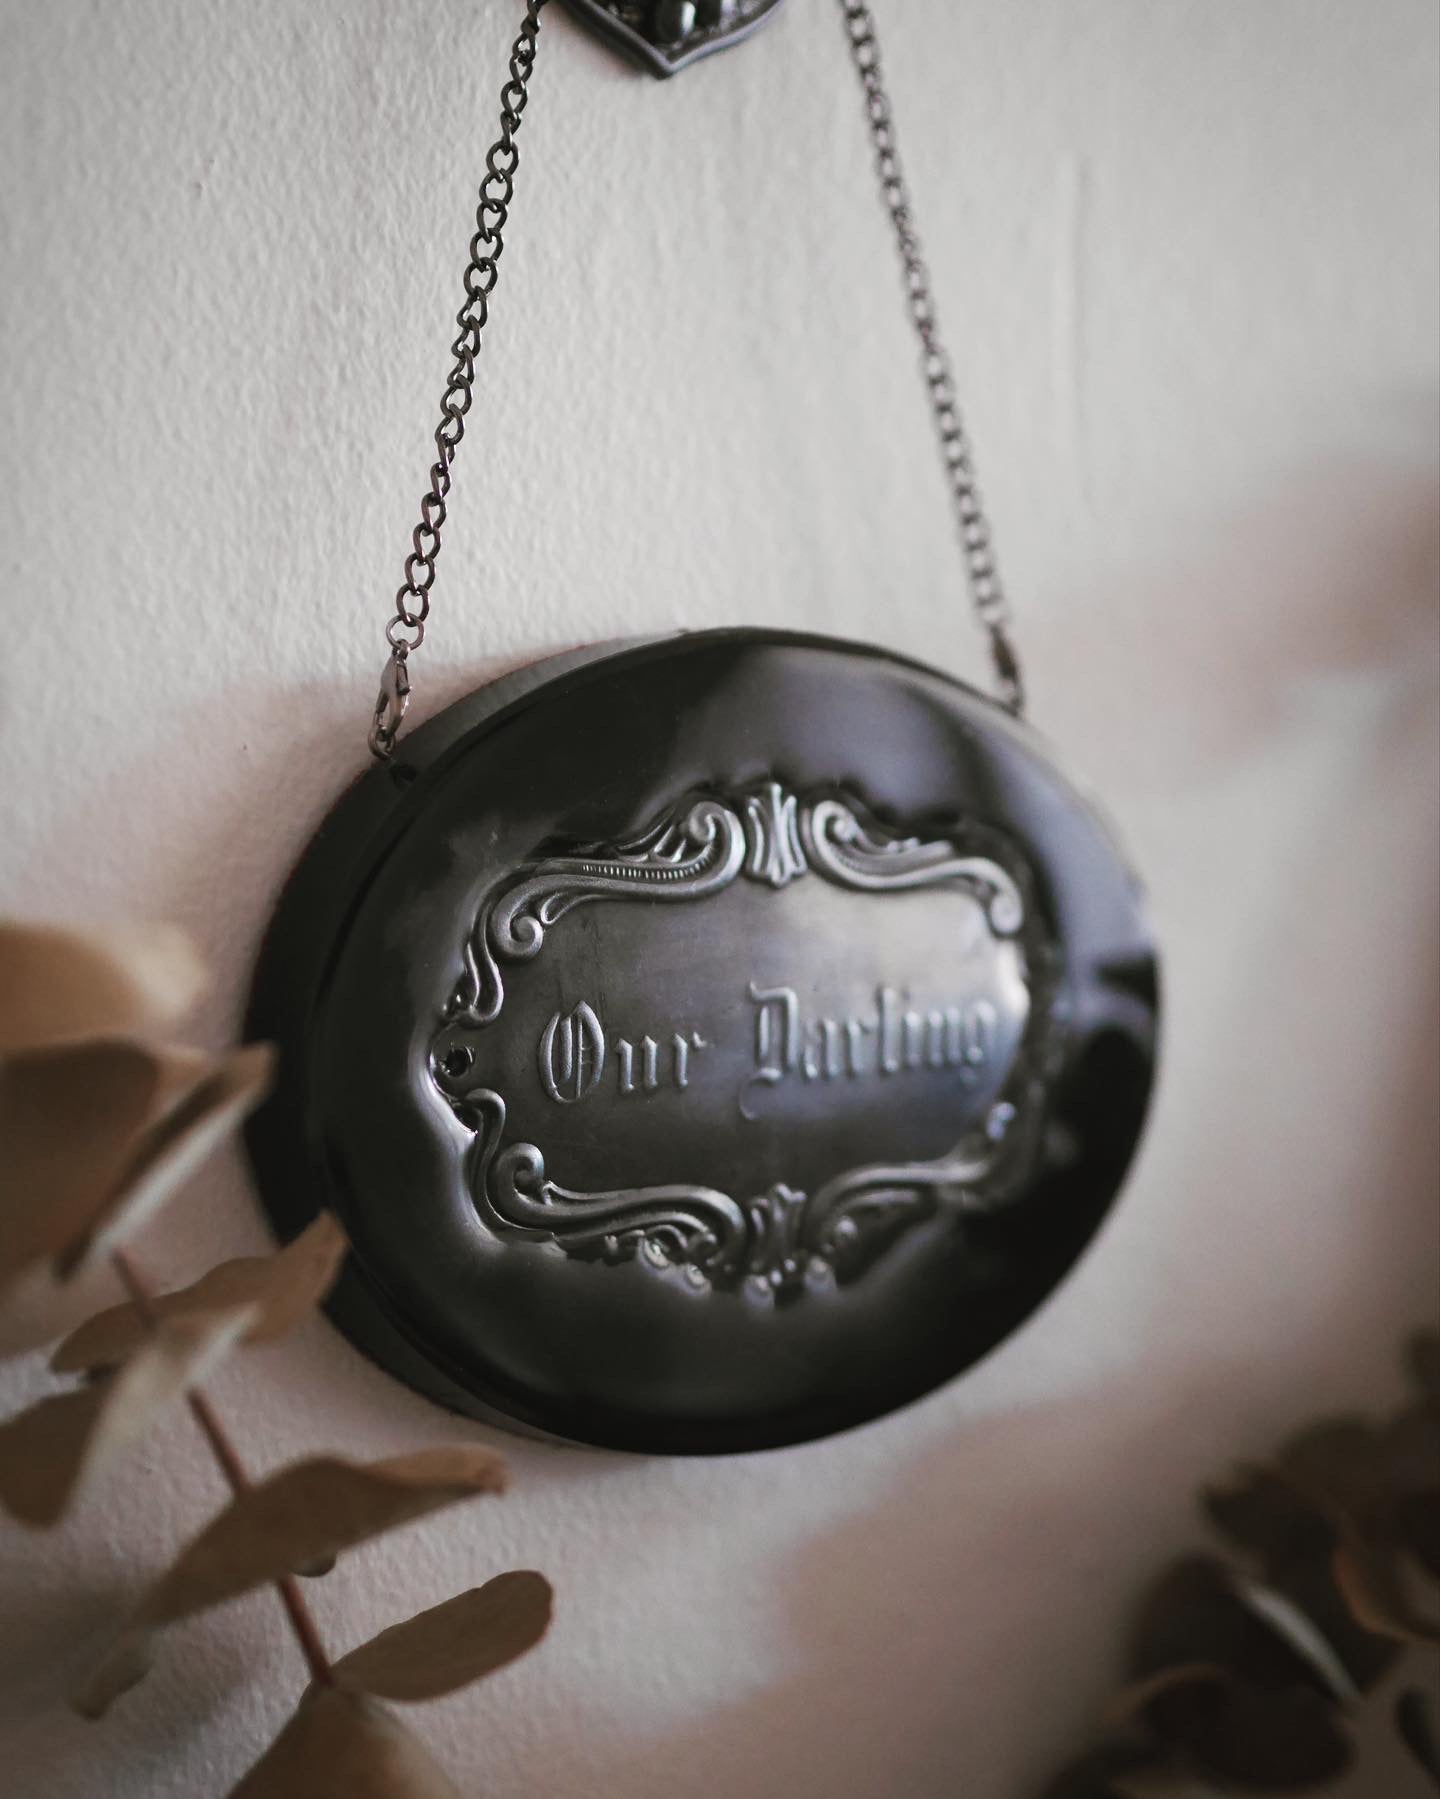 Our Darling Victorian Mourning Casket Plaque - Pewter - MADE TO ORDER